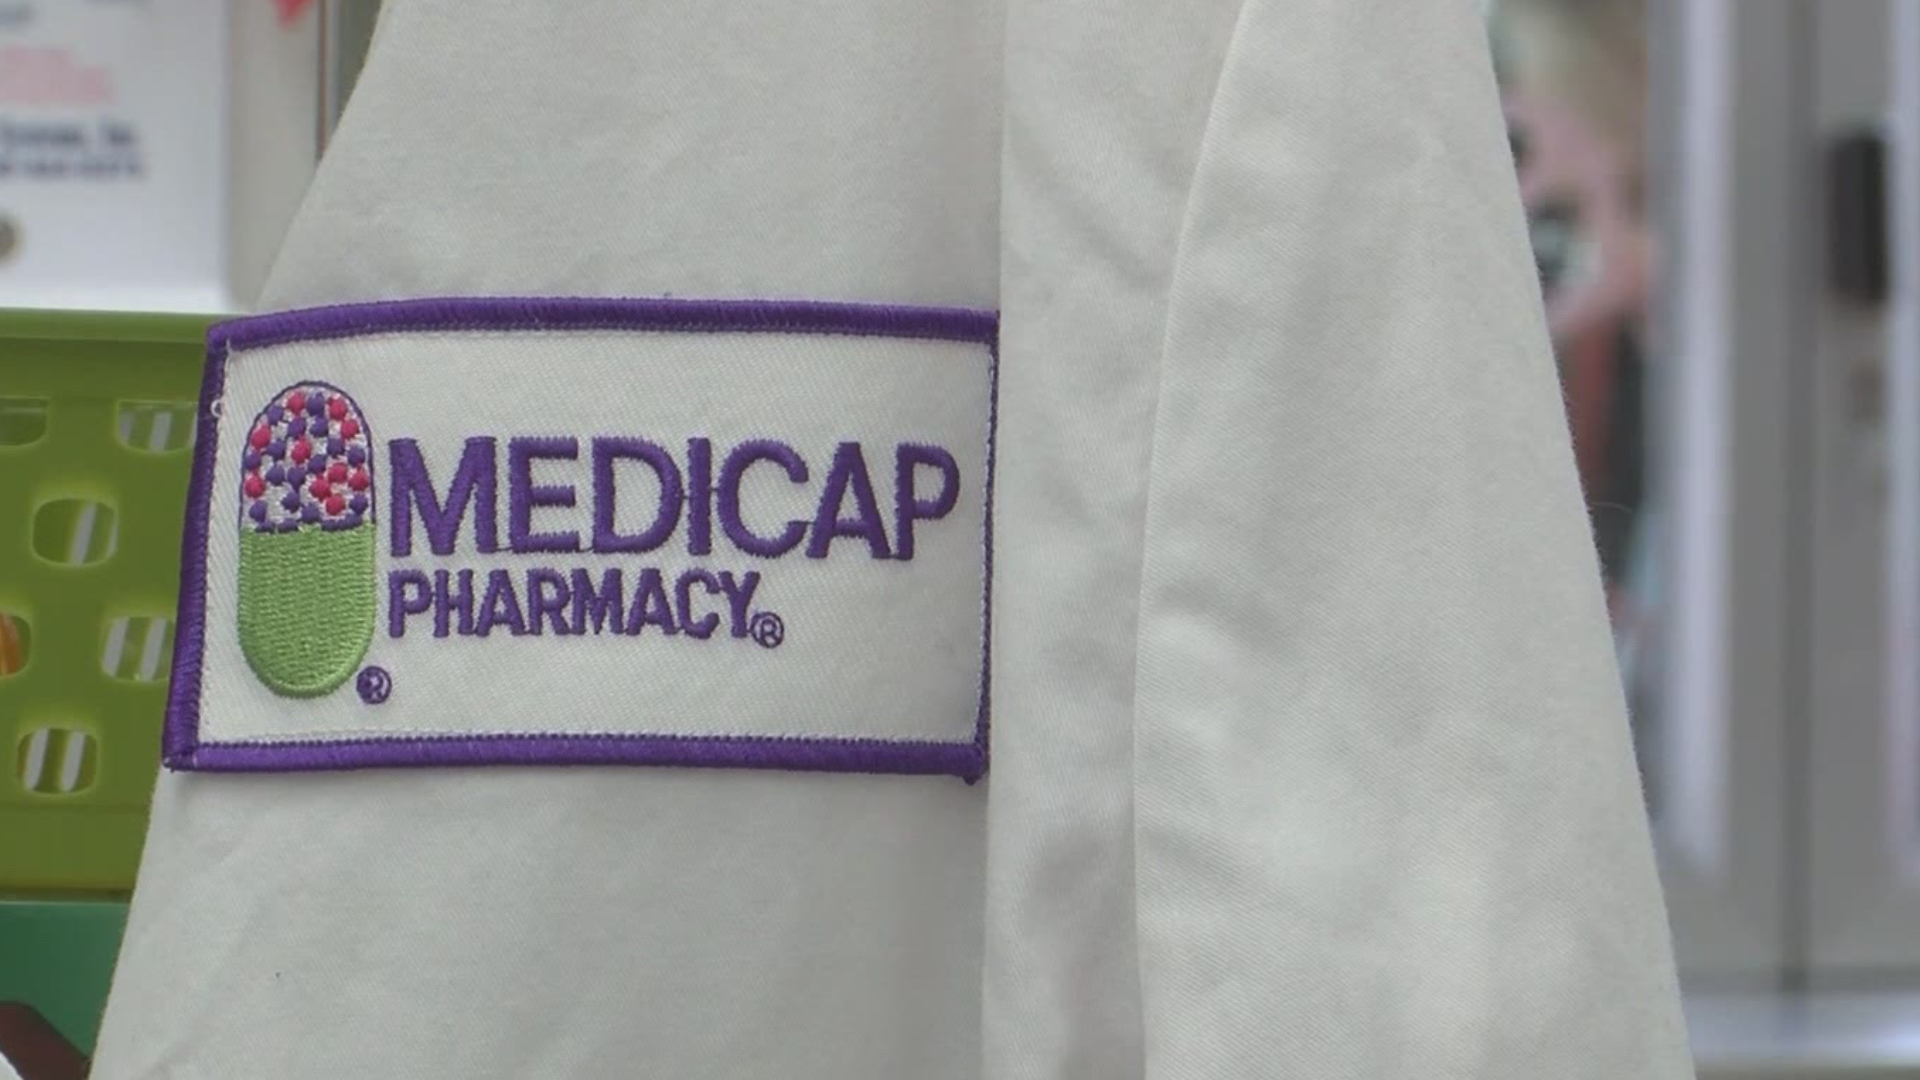 The Carlisle Medicap Pharmacy reached out to the public library for assistance with scheduling vaccine appointments back in December.